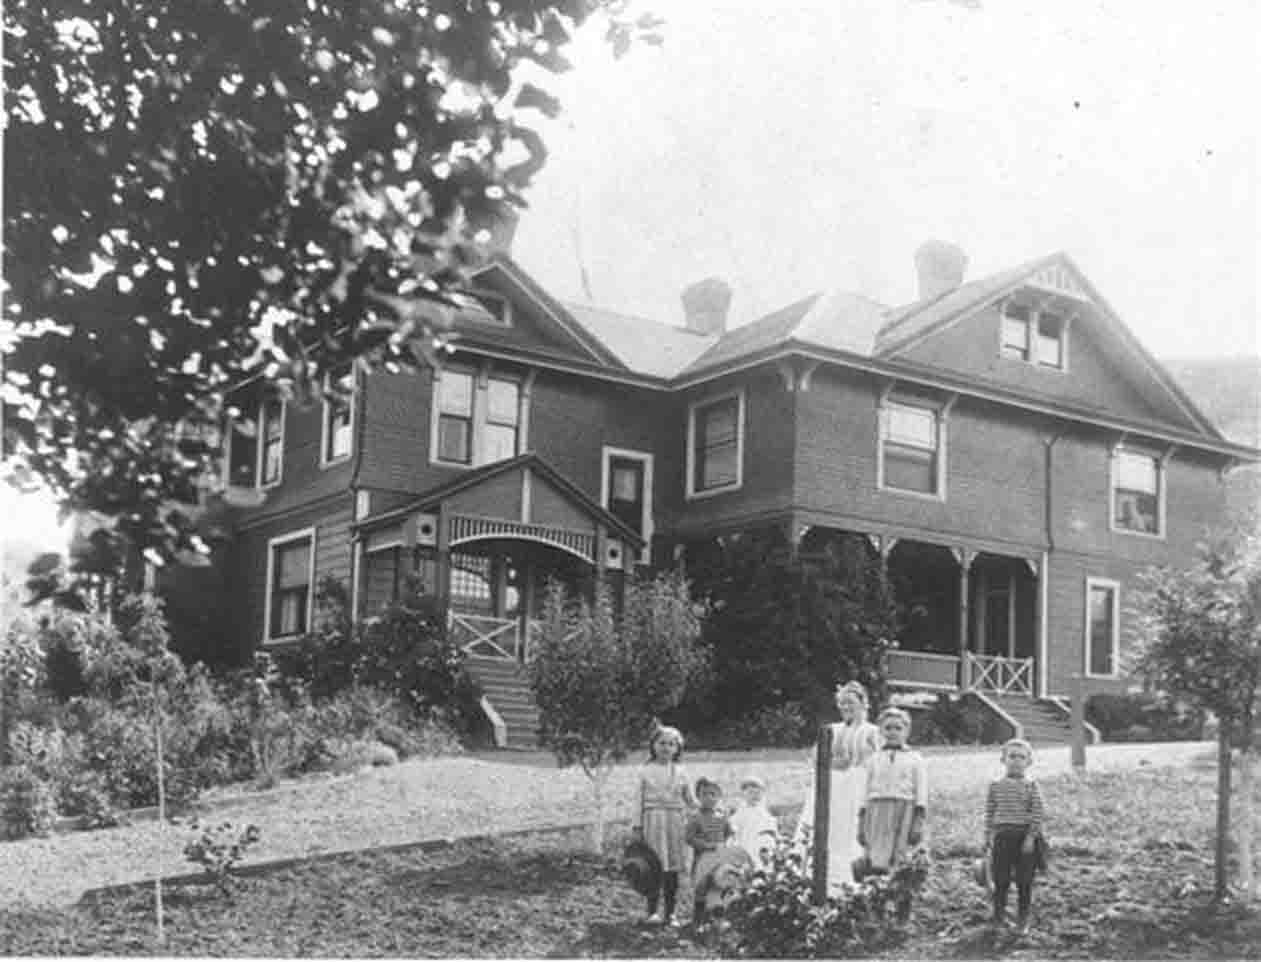 The Allen Family at the Hawthorn House (G.T. White, 1893, Town of Portola Valley Collection)